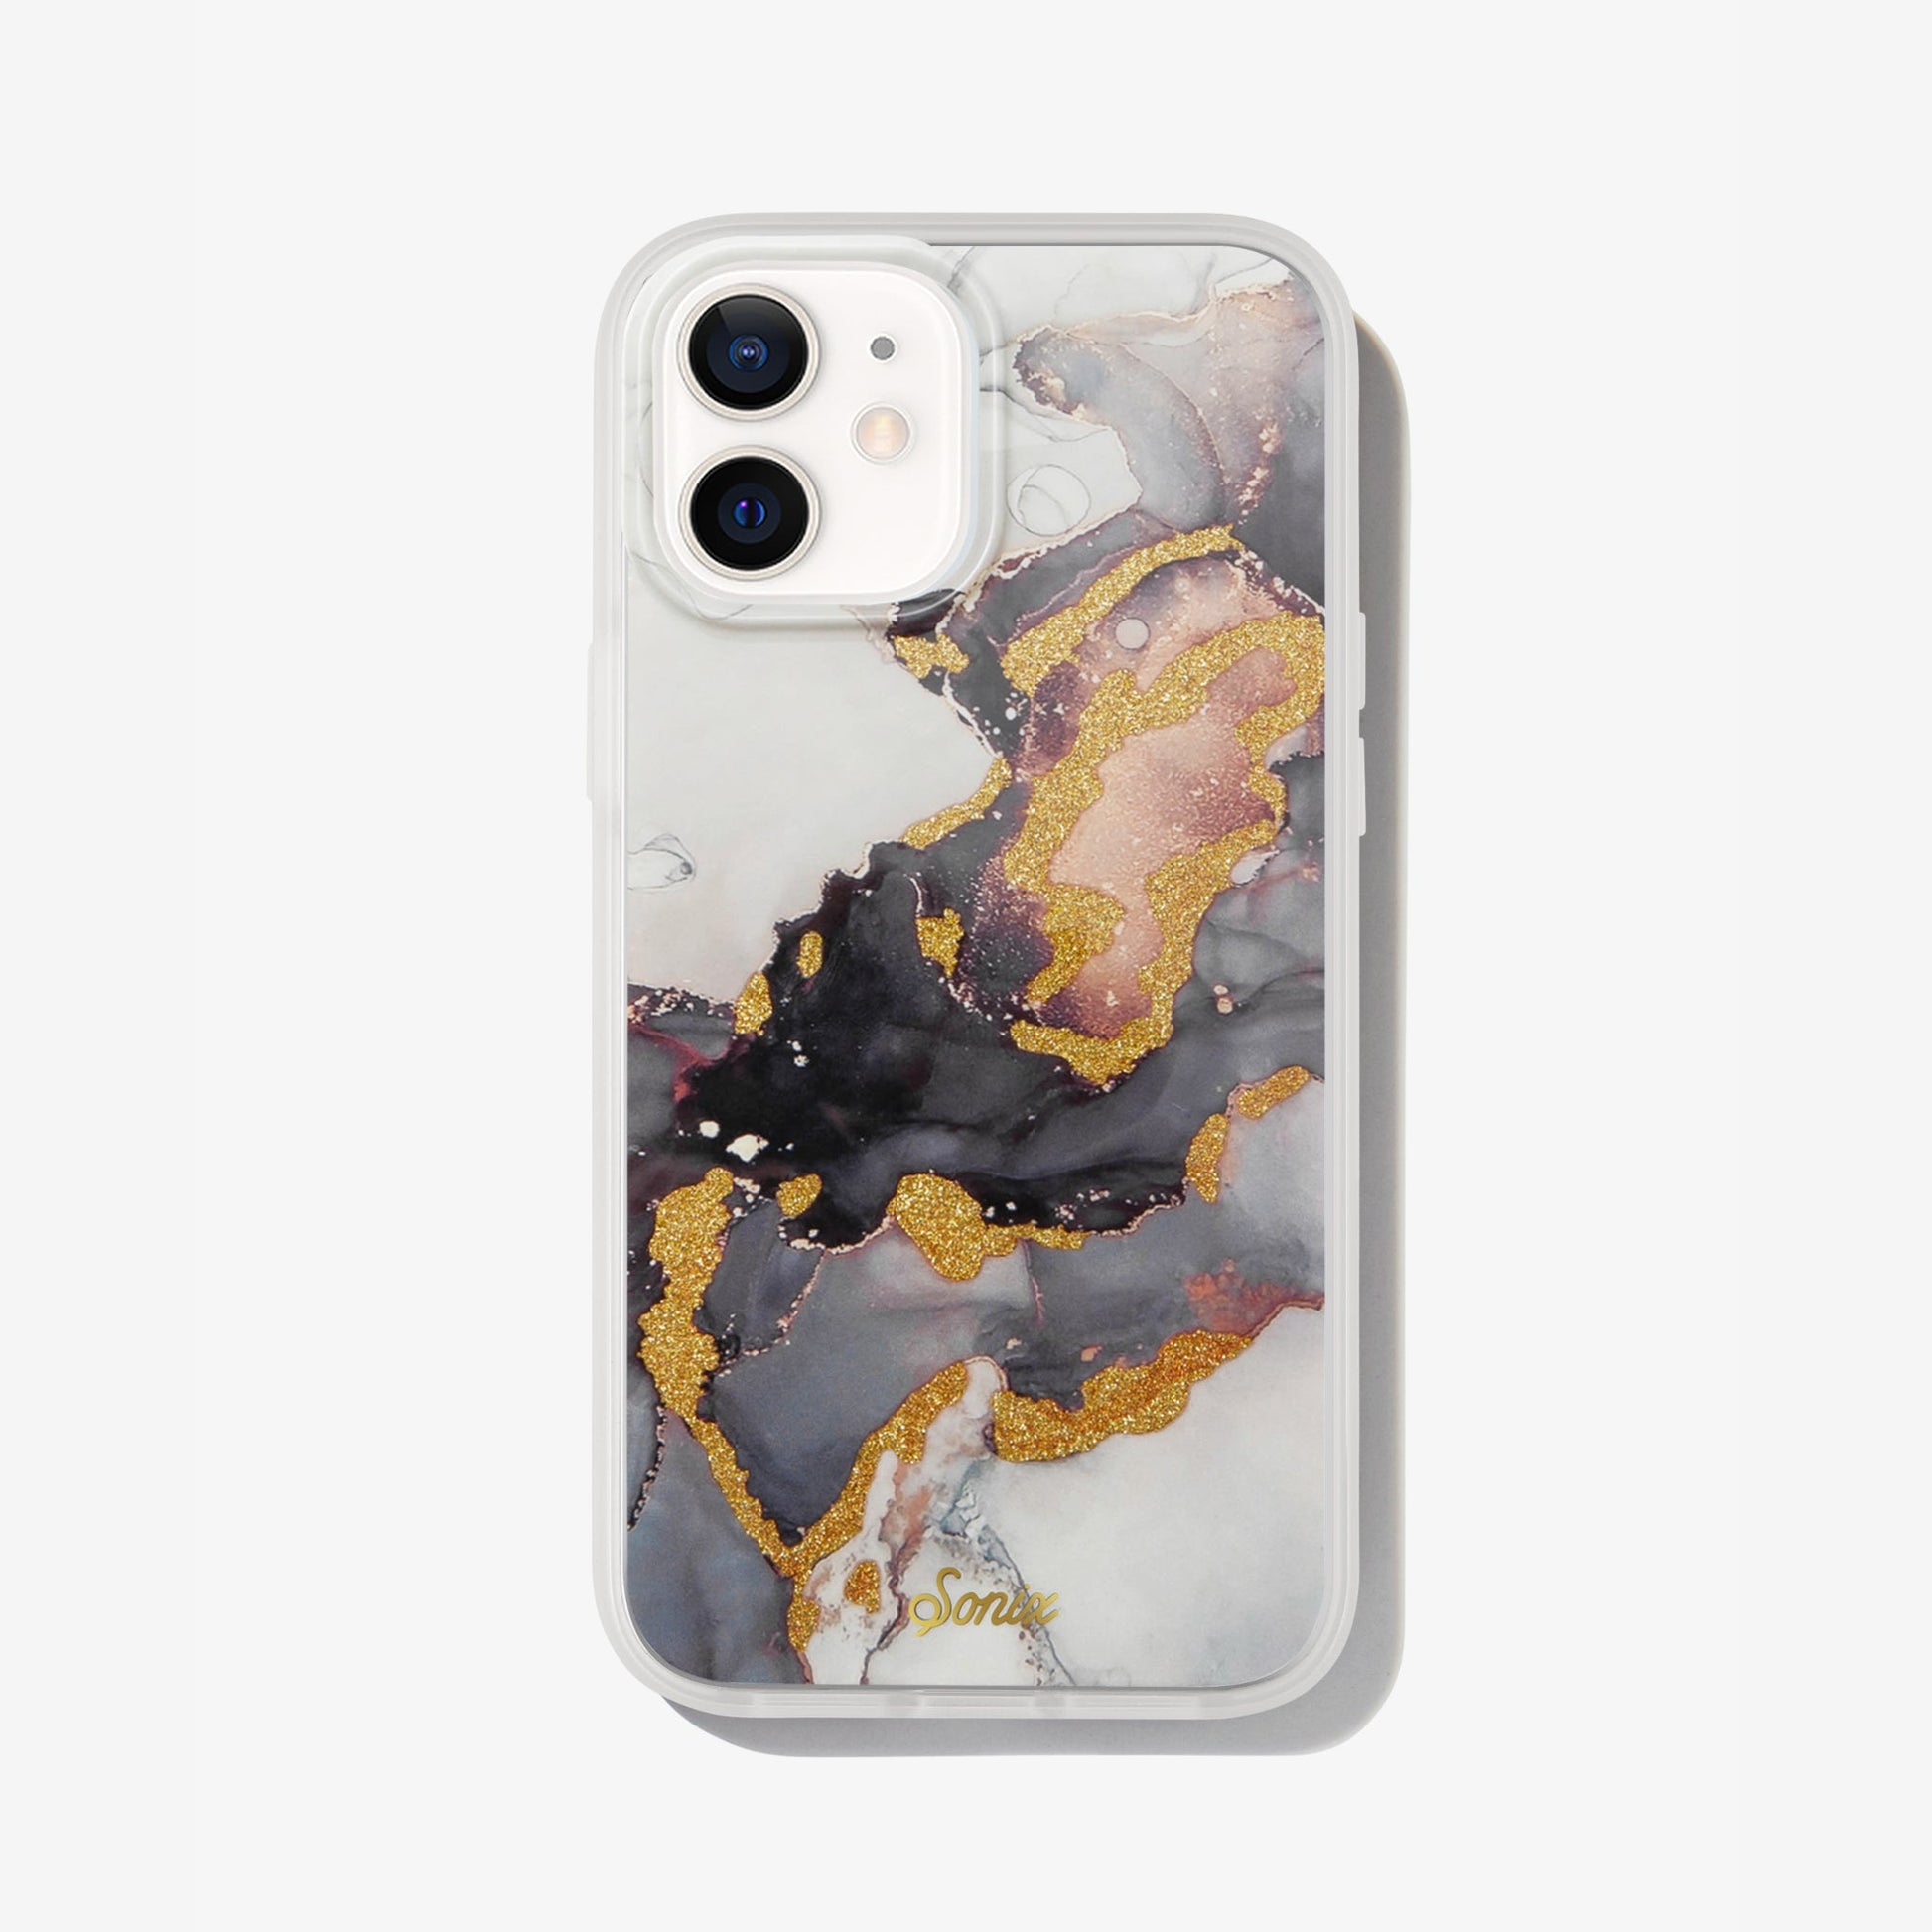 an intergalactic purple and dark colored design with gold glitter to bring out-of-this-world elements shown on an iphone 12